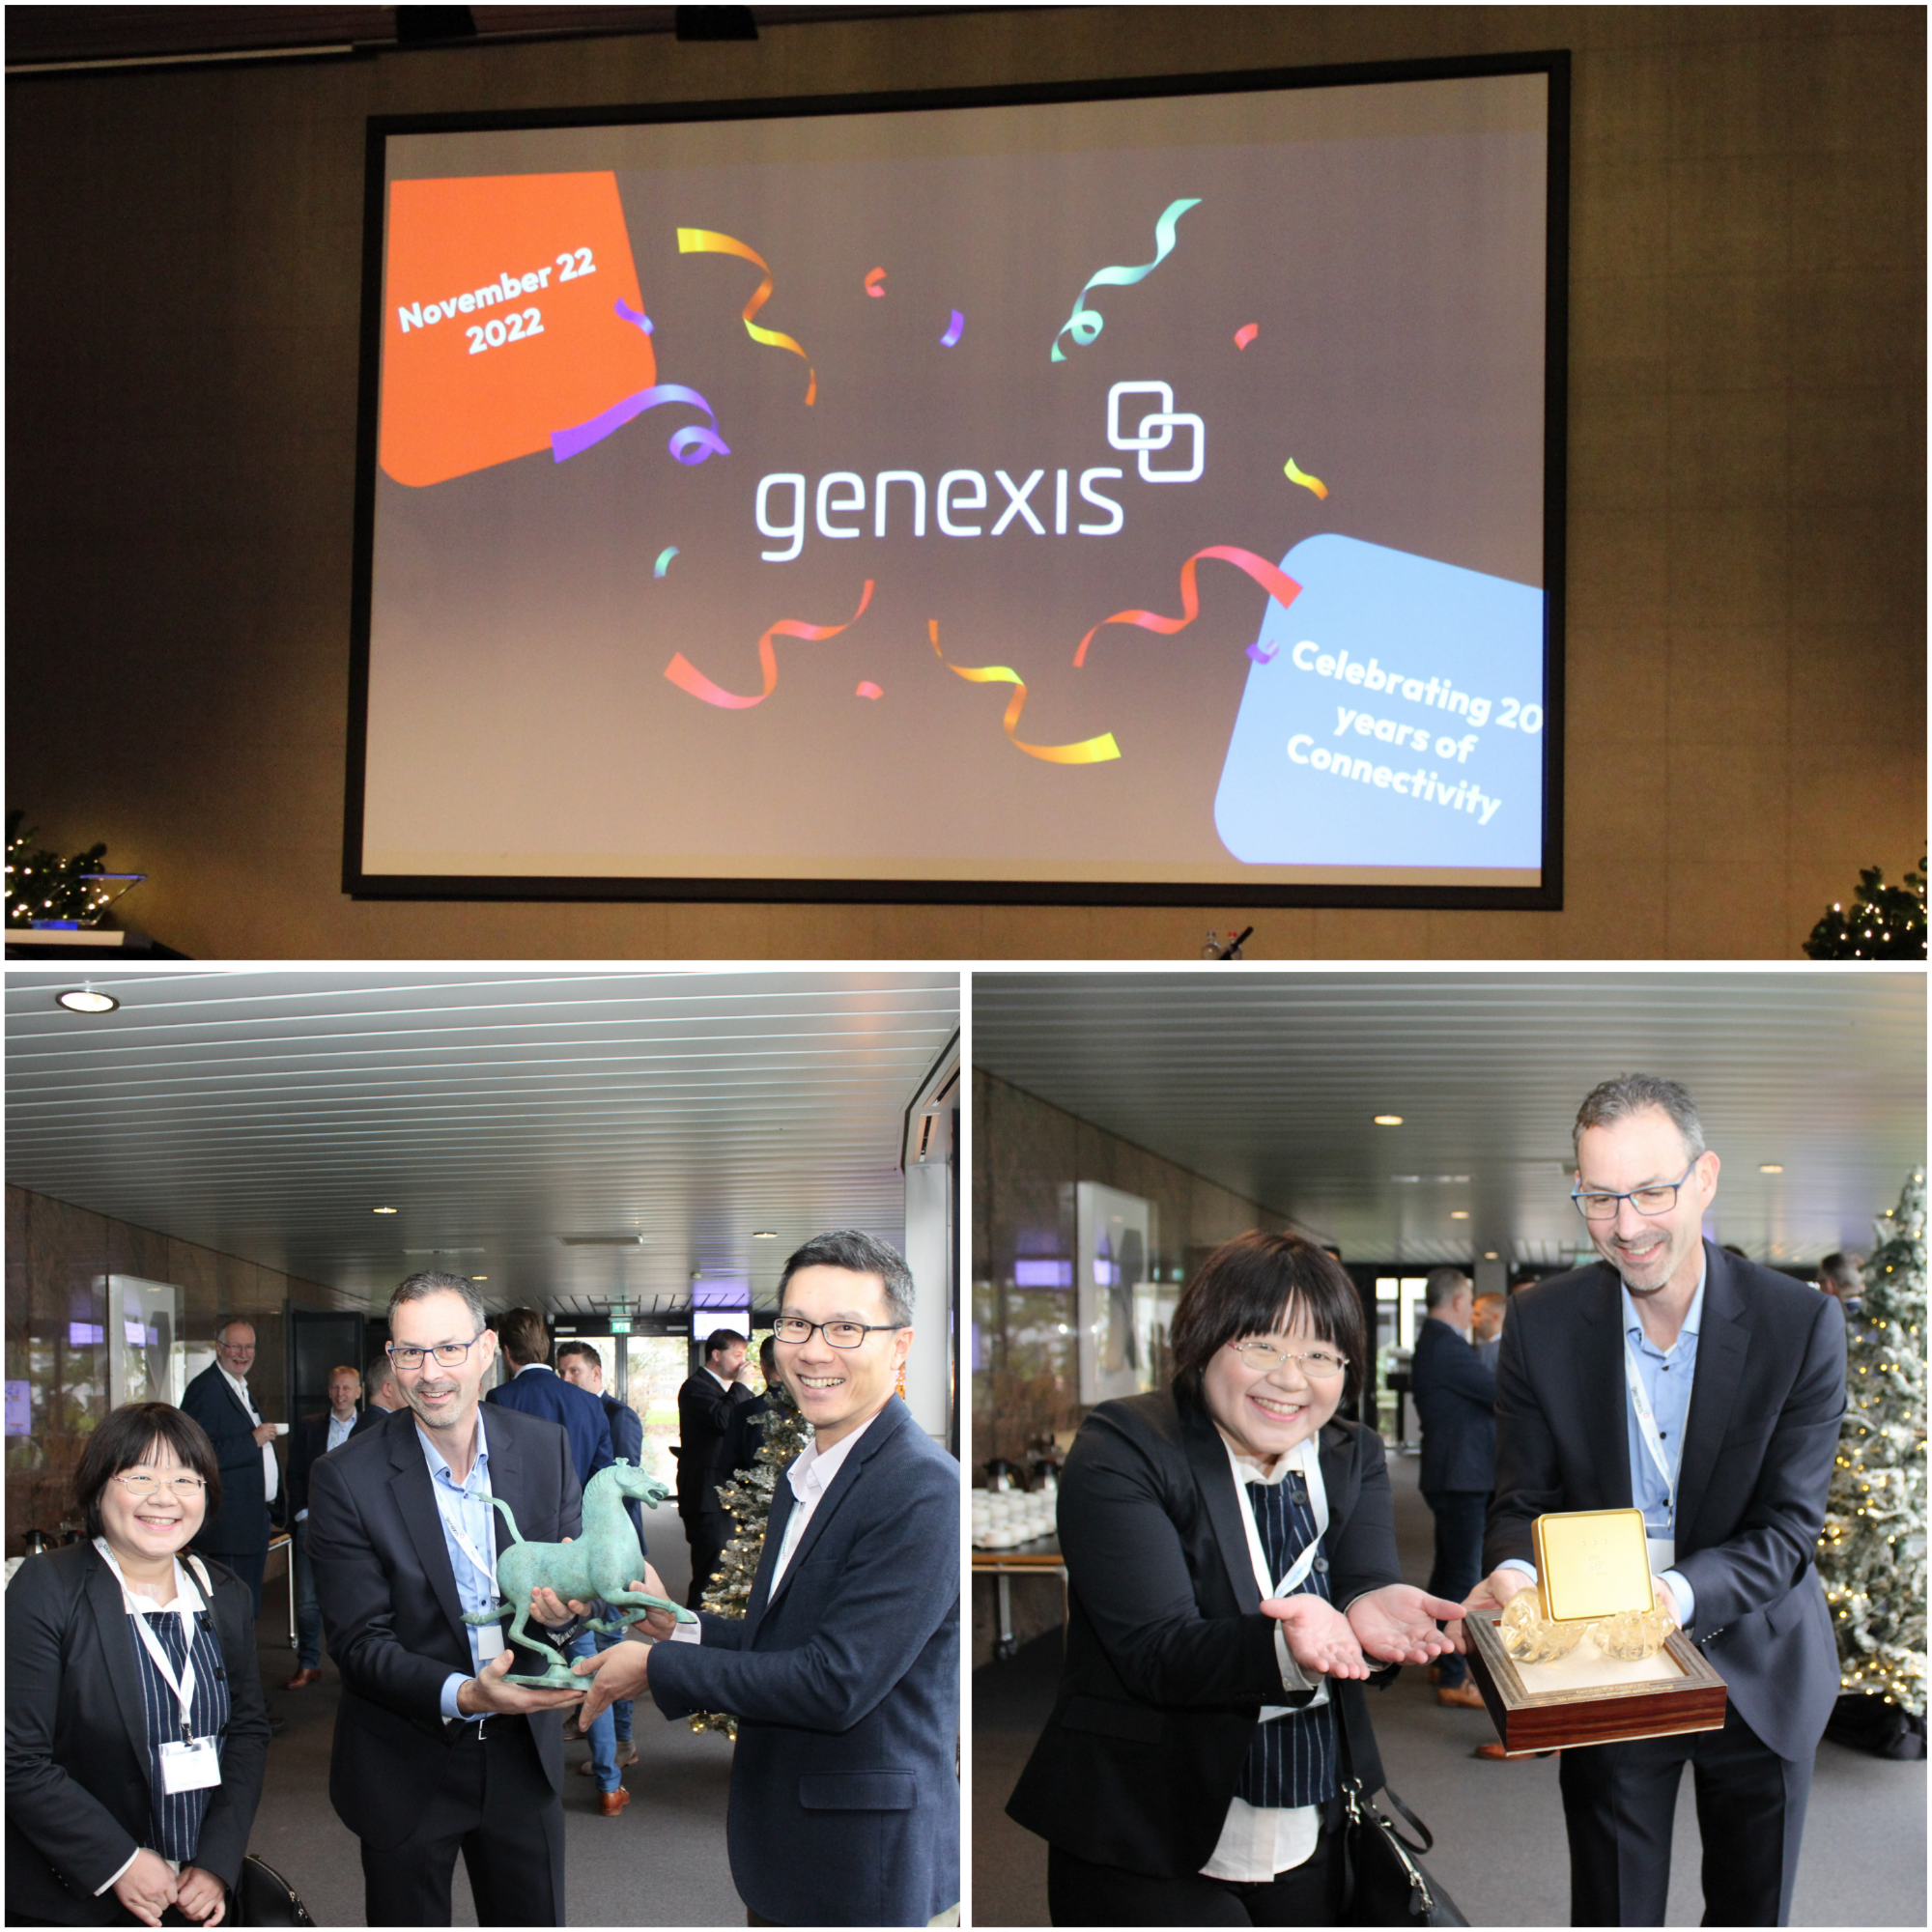 Genexis’ 20-year-anniversary   on the 22nd of November, 2022.